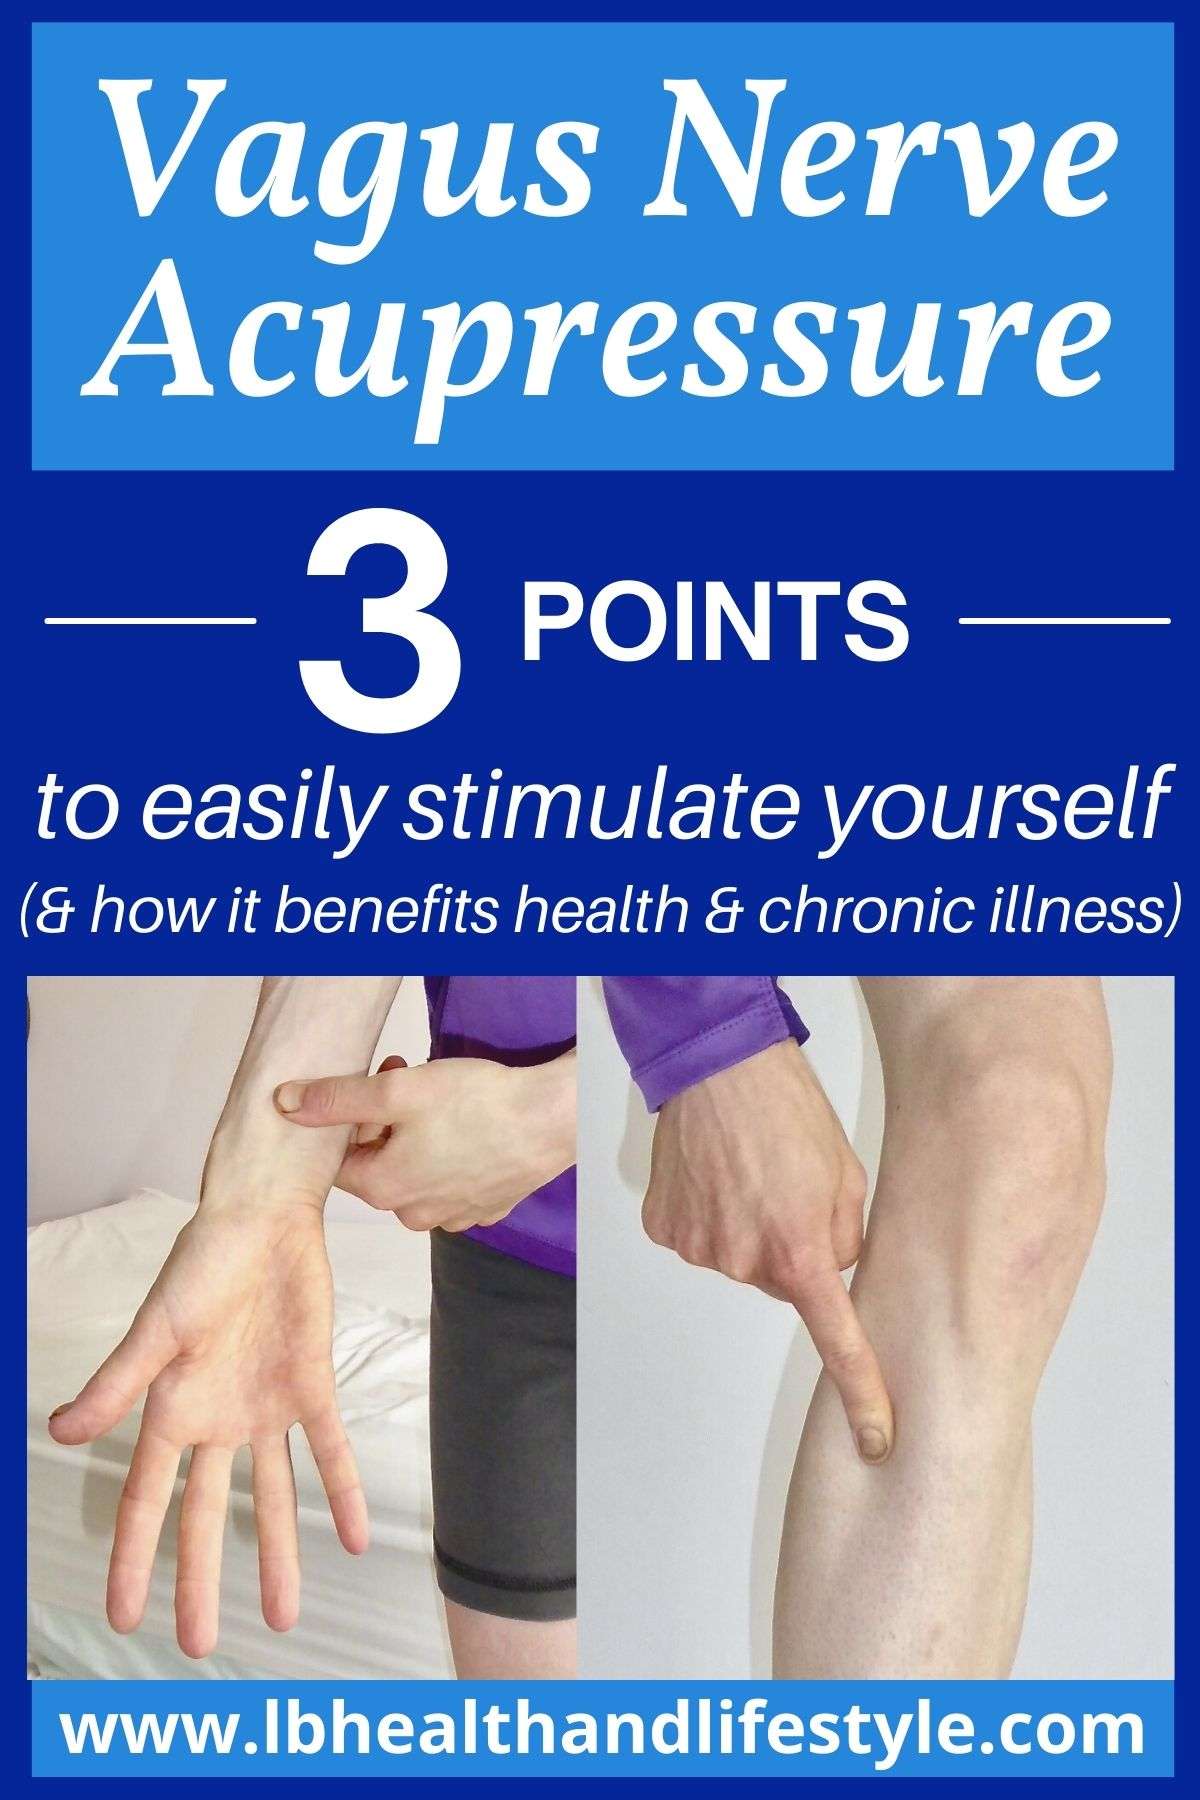 3 vagus nerve acupressure points to easily stimulate yourself & how it benefits health & chronic illness